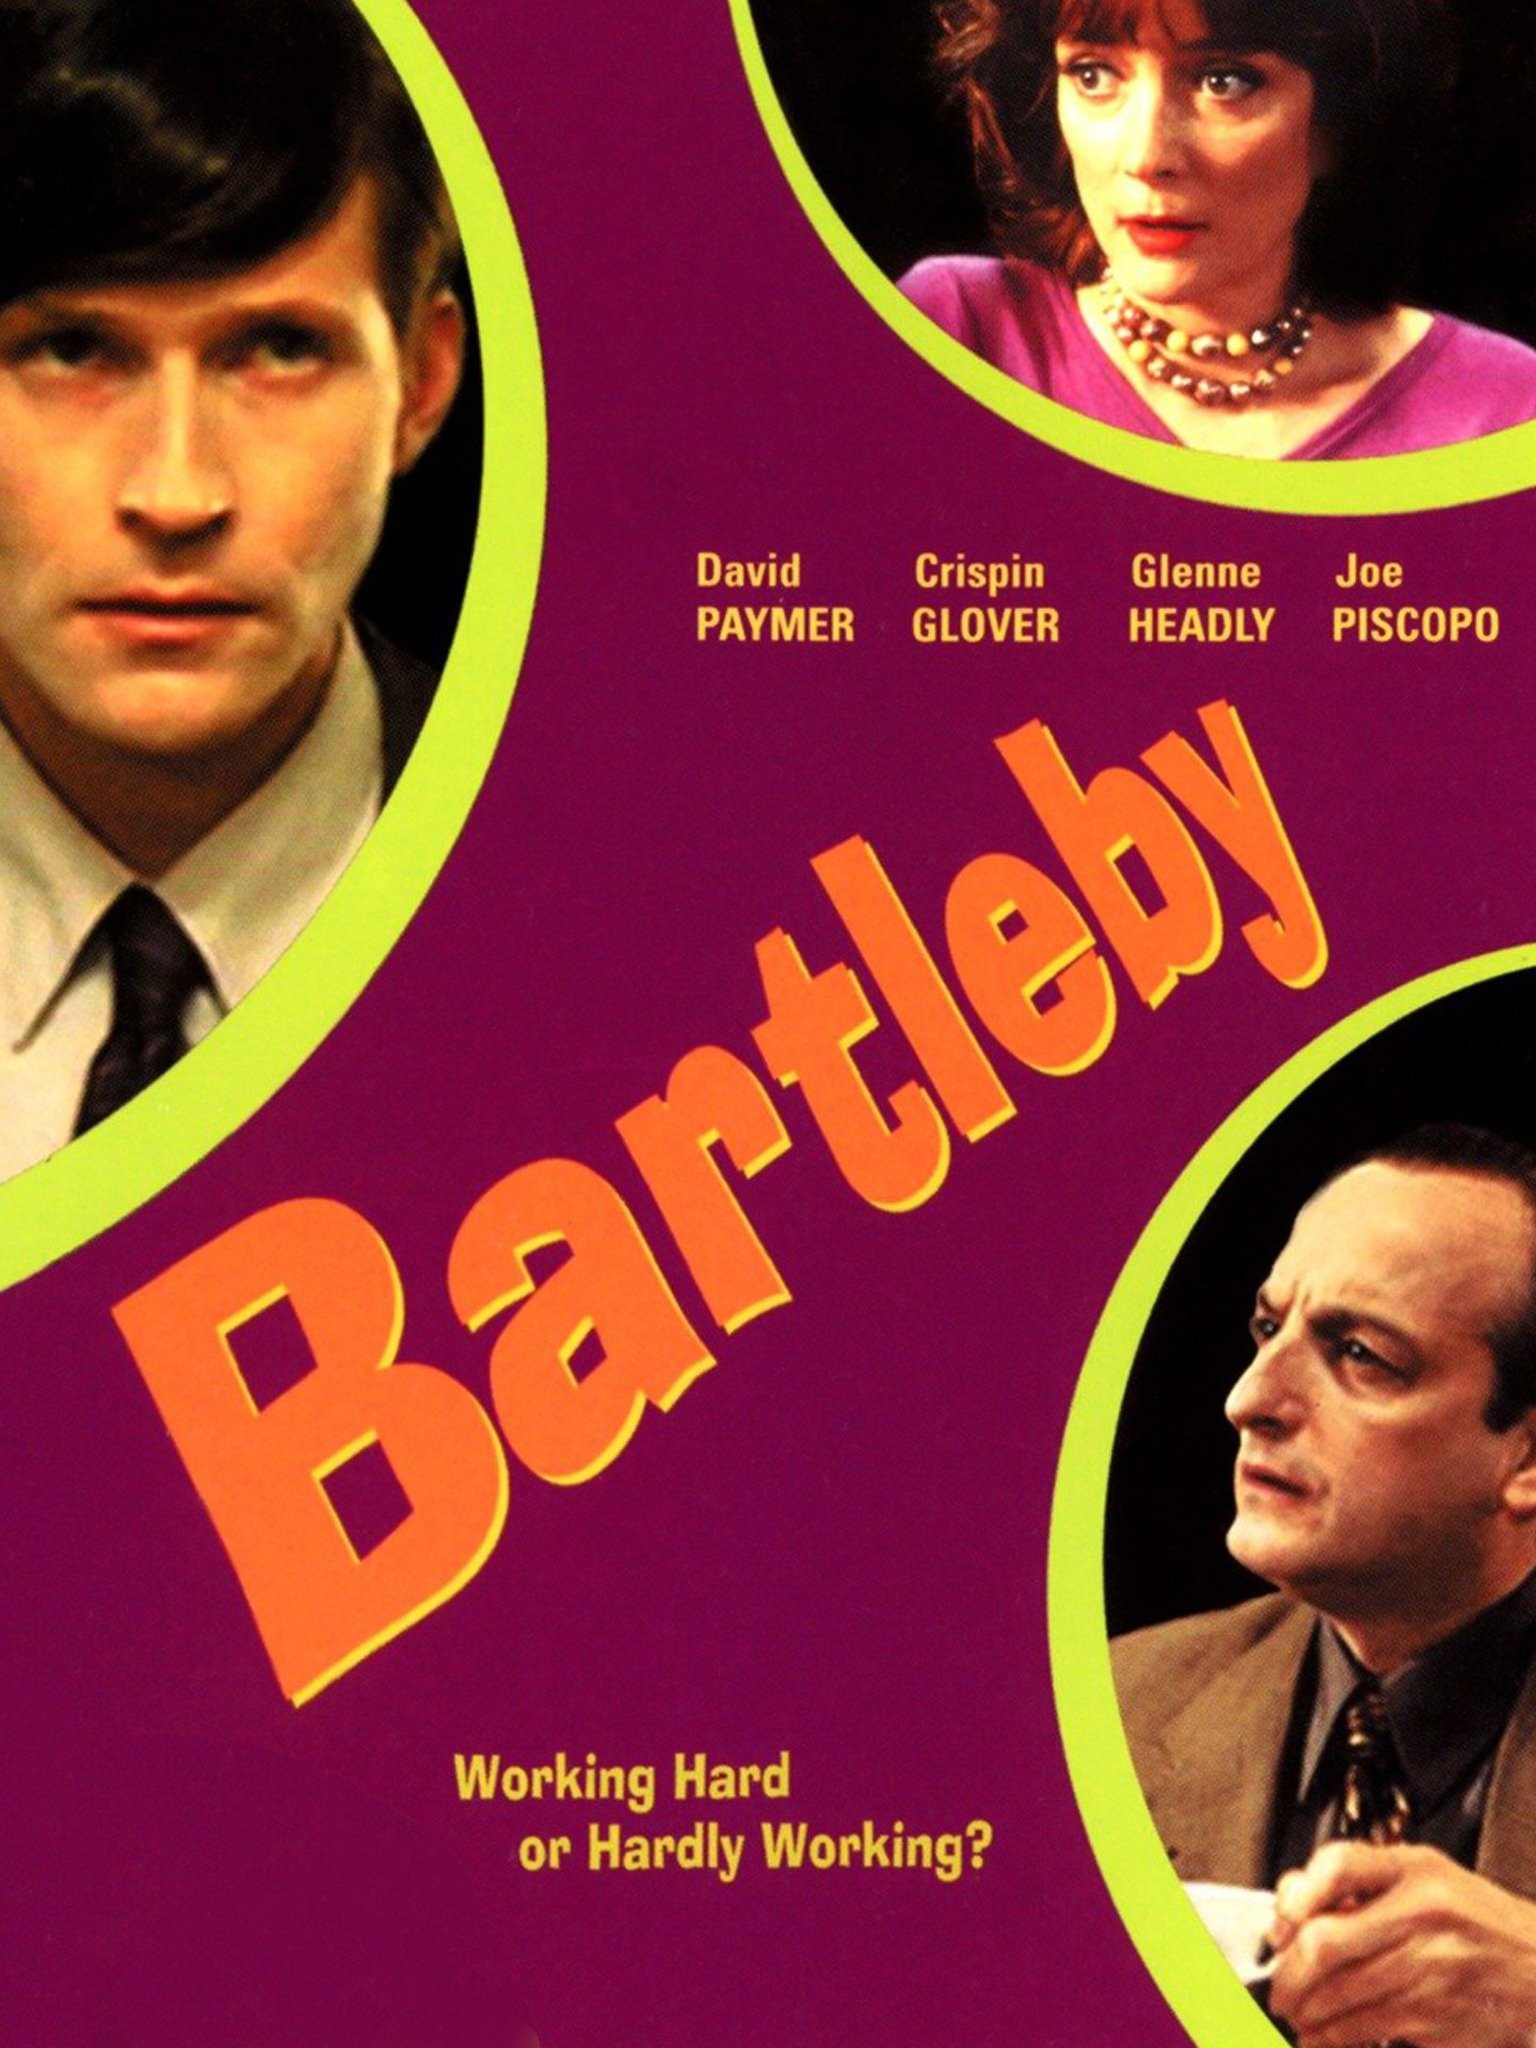 Working hard or hardly working. Другие 2001 Постер. Bartleby the Scrivener movie 2001.